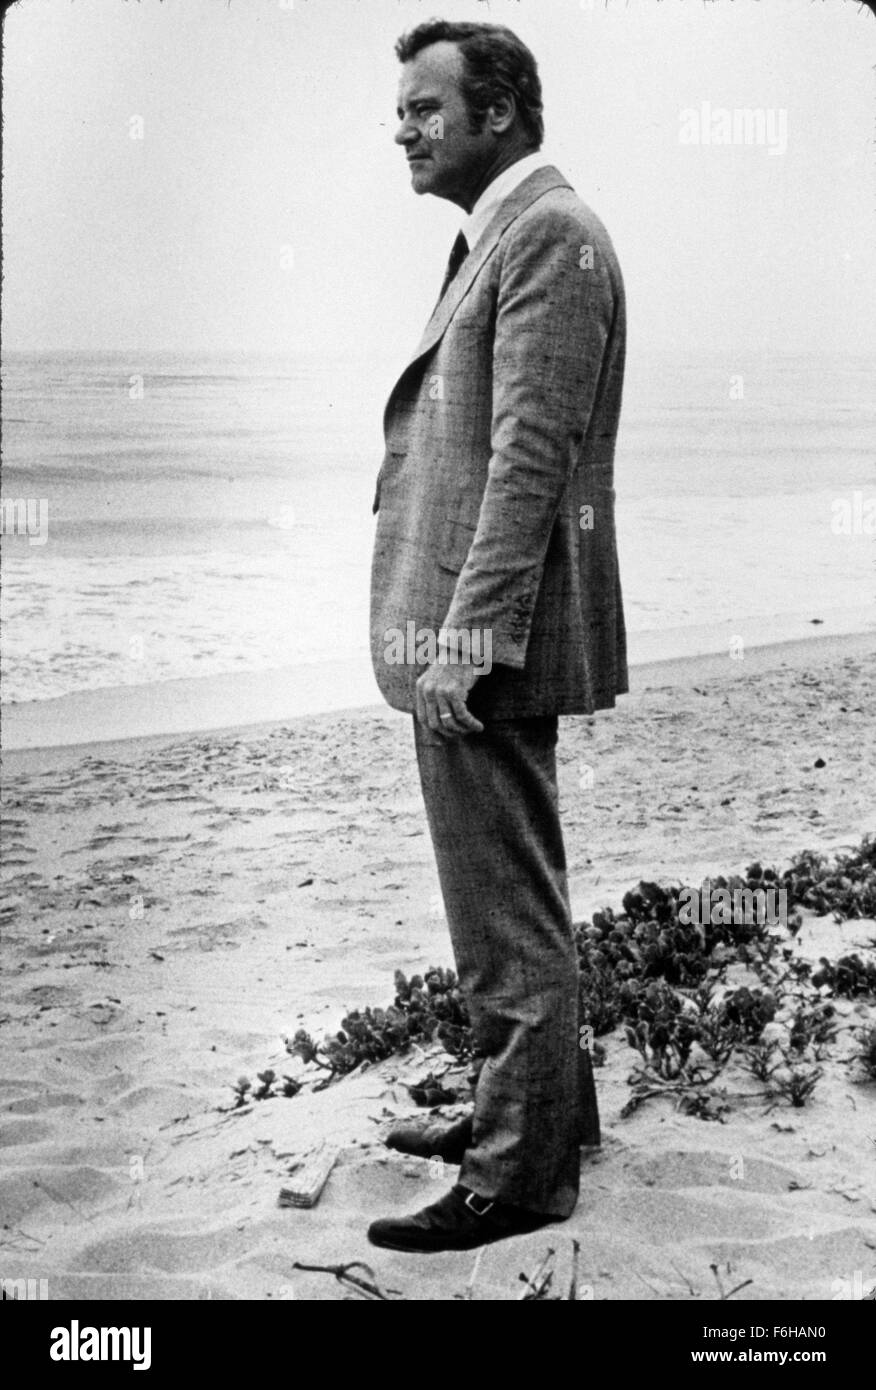 1973, Film Title: SAVE THE TIGER, Director: JOHN G AVILDSEN, Studio: PARAMOUNT, Pictured: 1973, AWARDS - ACADEMY, BEST ACTOR, JACK LEMMON, BEACH, SEASIDE, LOOKING OUT TO SEA, CONTEMPLATIVE. (Credit Image: SNAP) (Credit Image: c SNAP/Entertainment Pictures) Stock Photo